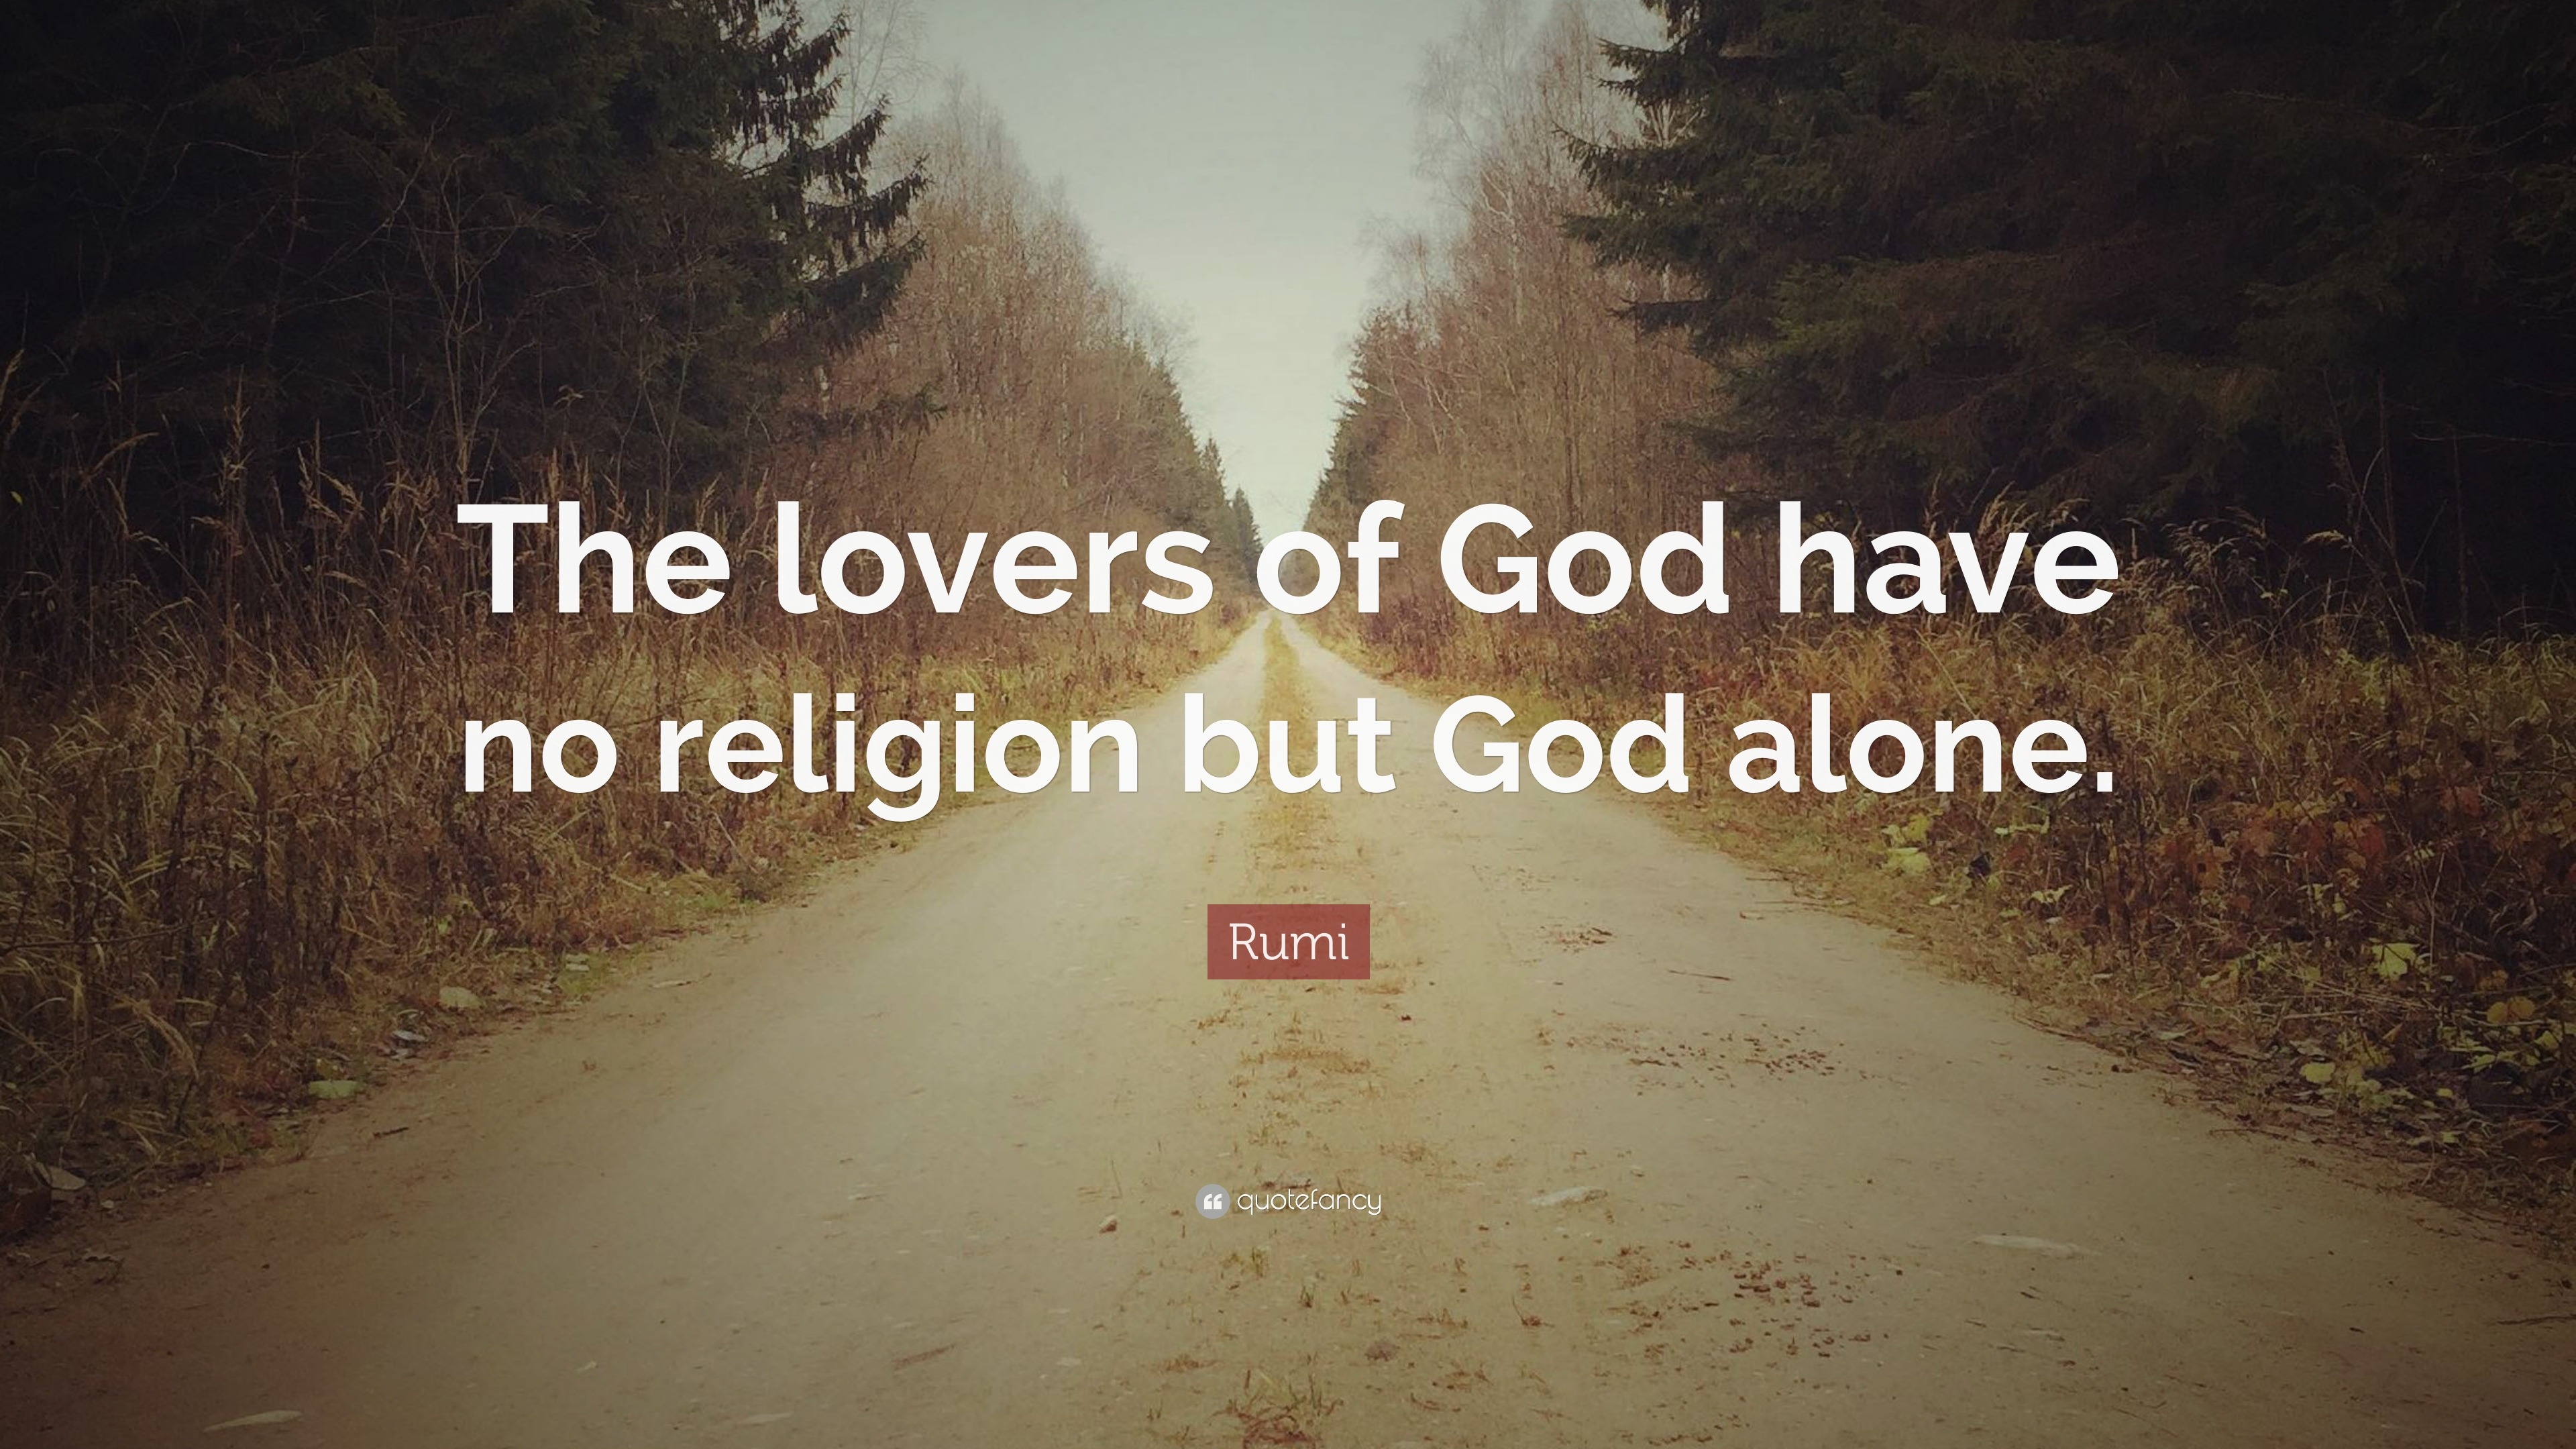 Rumi Quote “The lovers of God have no religion but God